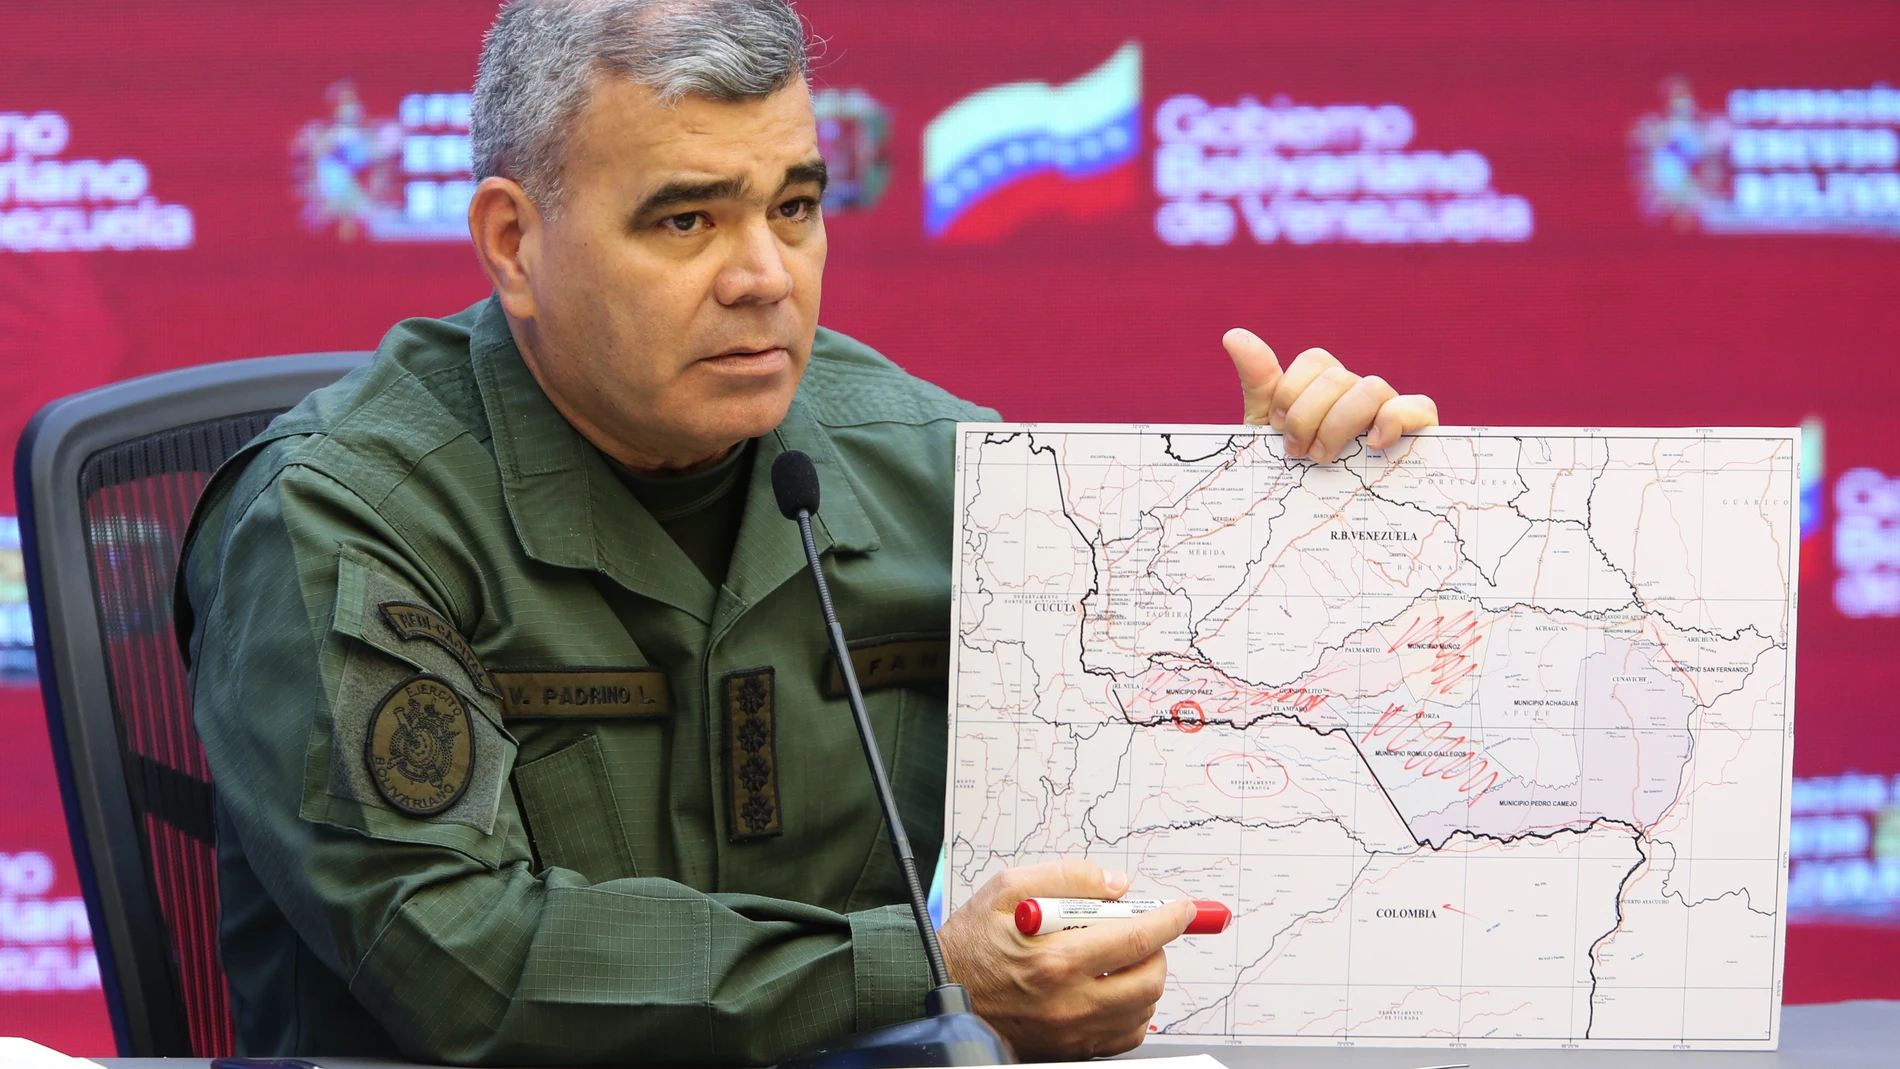 HANDOUT - 05 April 2021, Venezuela, Caracas: Vladimir Padrino, Defence Minister of Venezuela, shows a map with markings on the border with Colombia. Eight military personnel were reportedly killed in fighting between the Venezuelan military and armed Colombian gangs, according to information from the Venezuelan ministry. Photo: -/Prensa Miraflores/dpa - ATTENTION: editorial use only and only if the credit mentioned above is referenced in full05/04/2021 ONLY FOR USE IN SPAIN